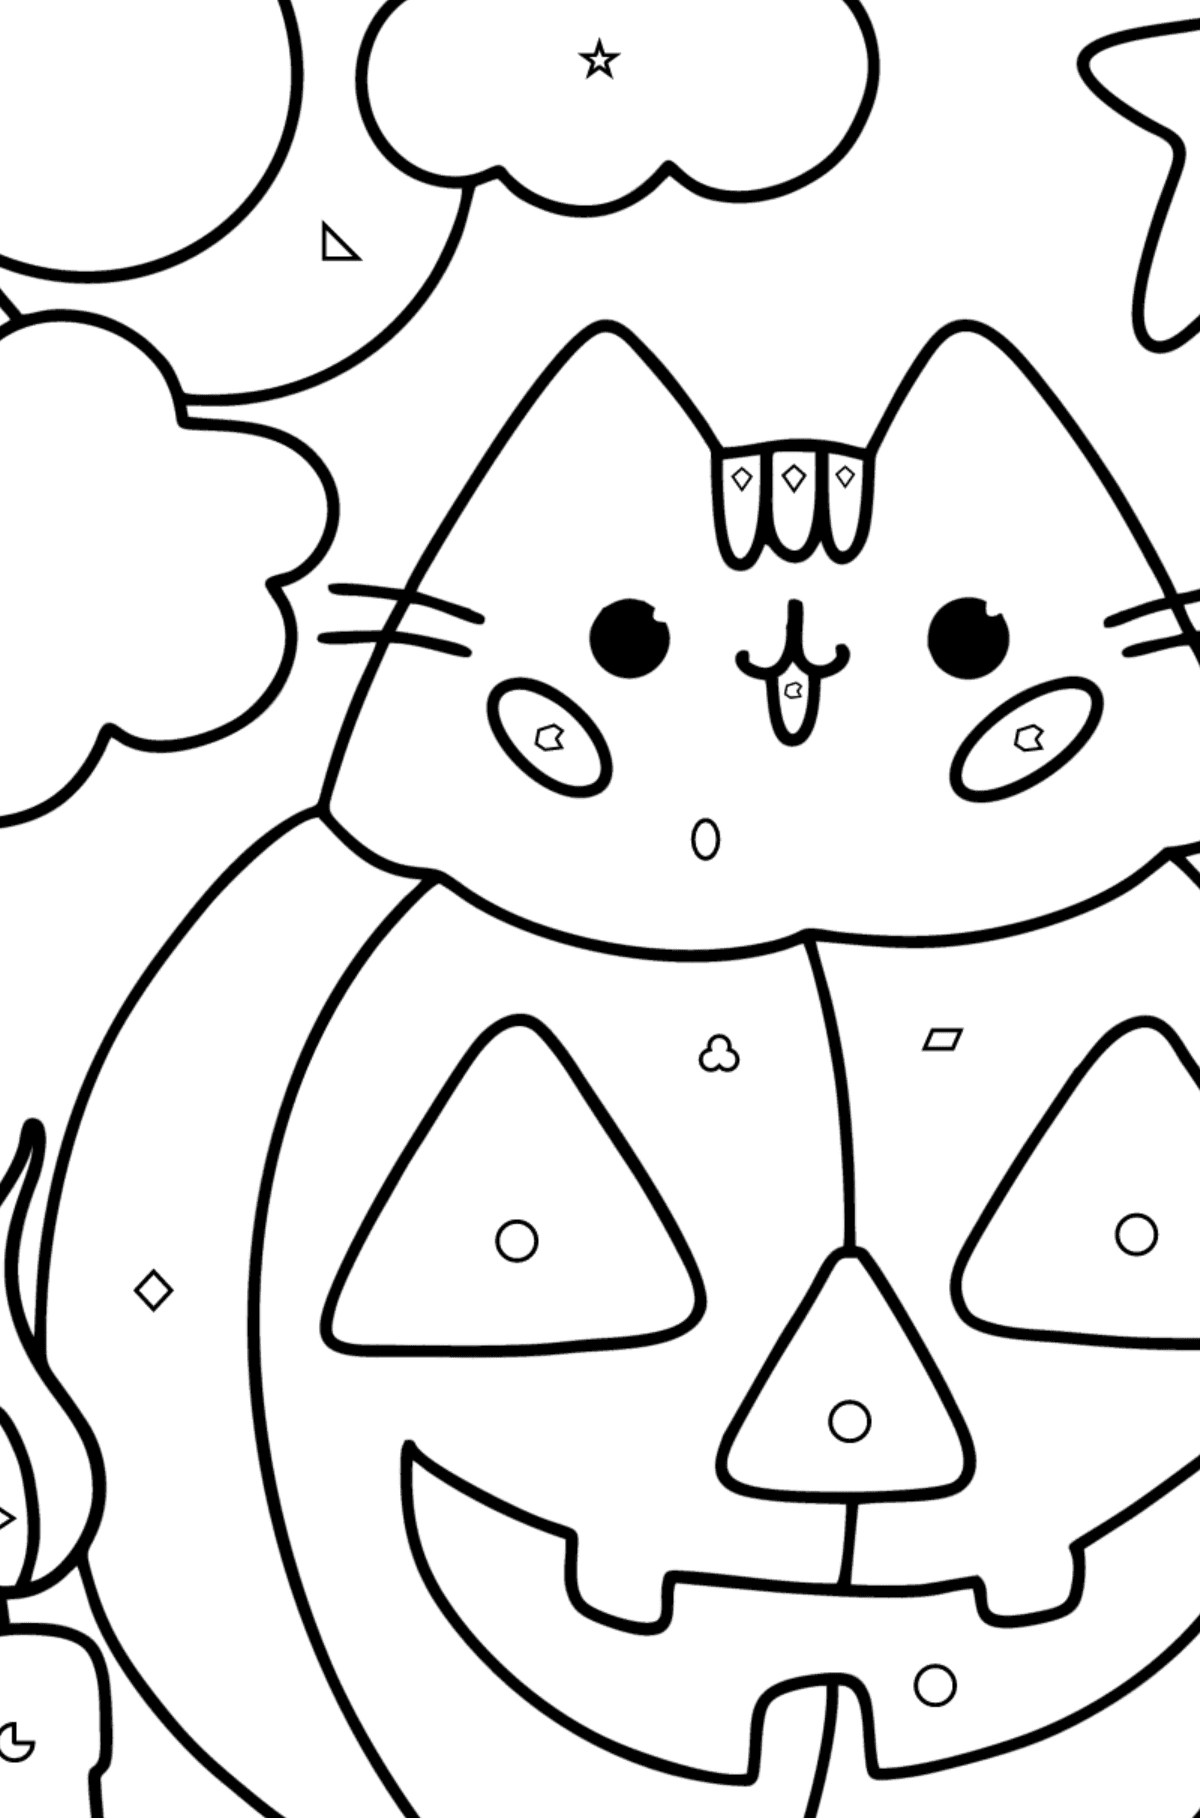 Pusheen and halloween сoloring page - Coloring by Geometric Shapes for Kids